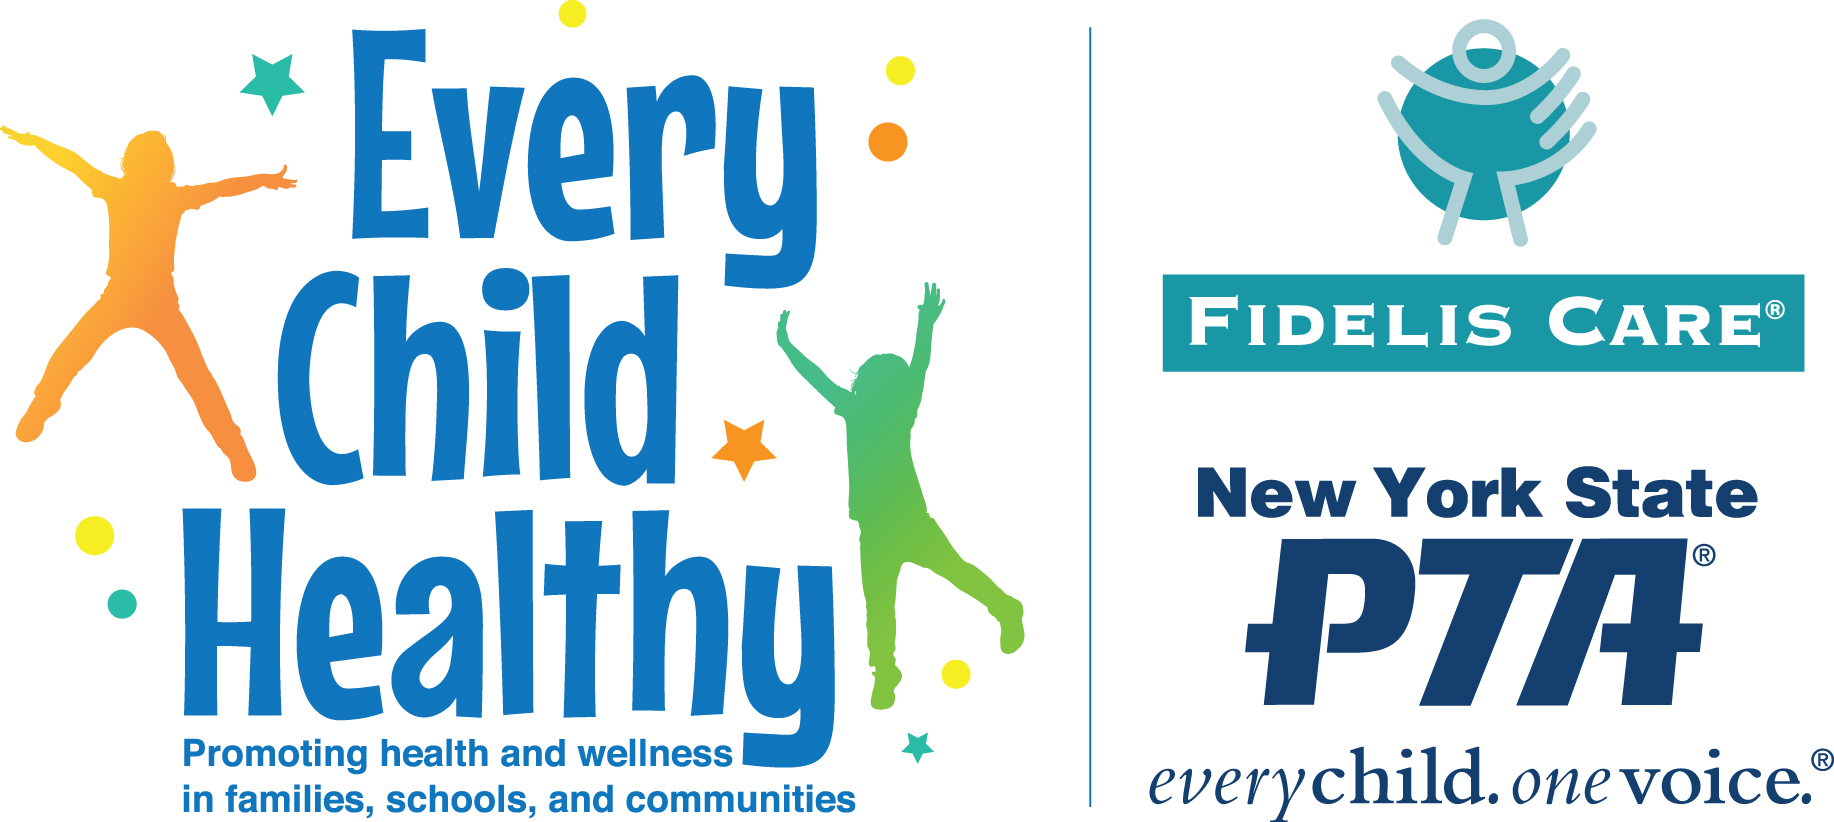 Every Child Healthy Fidelis Care